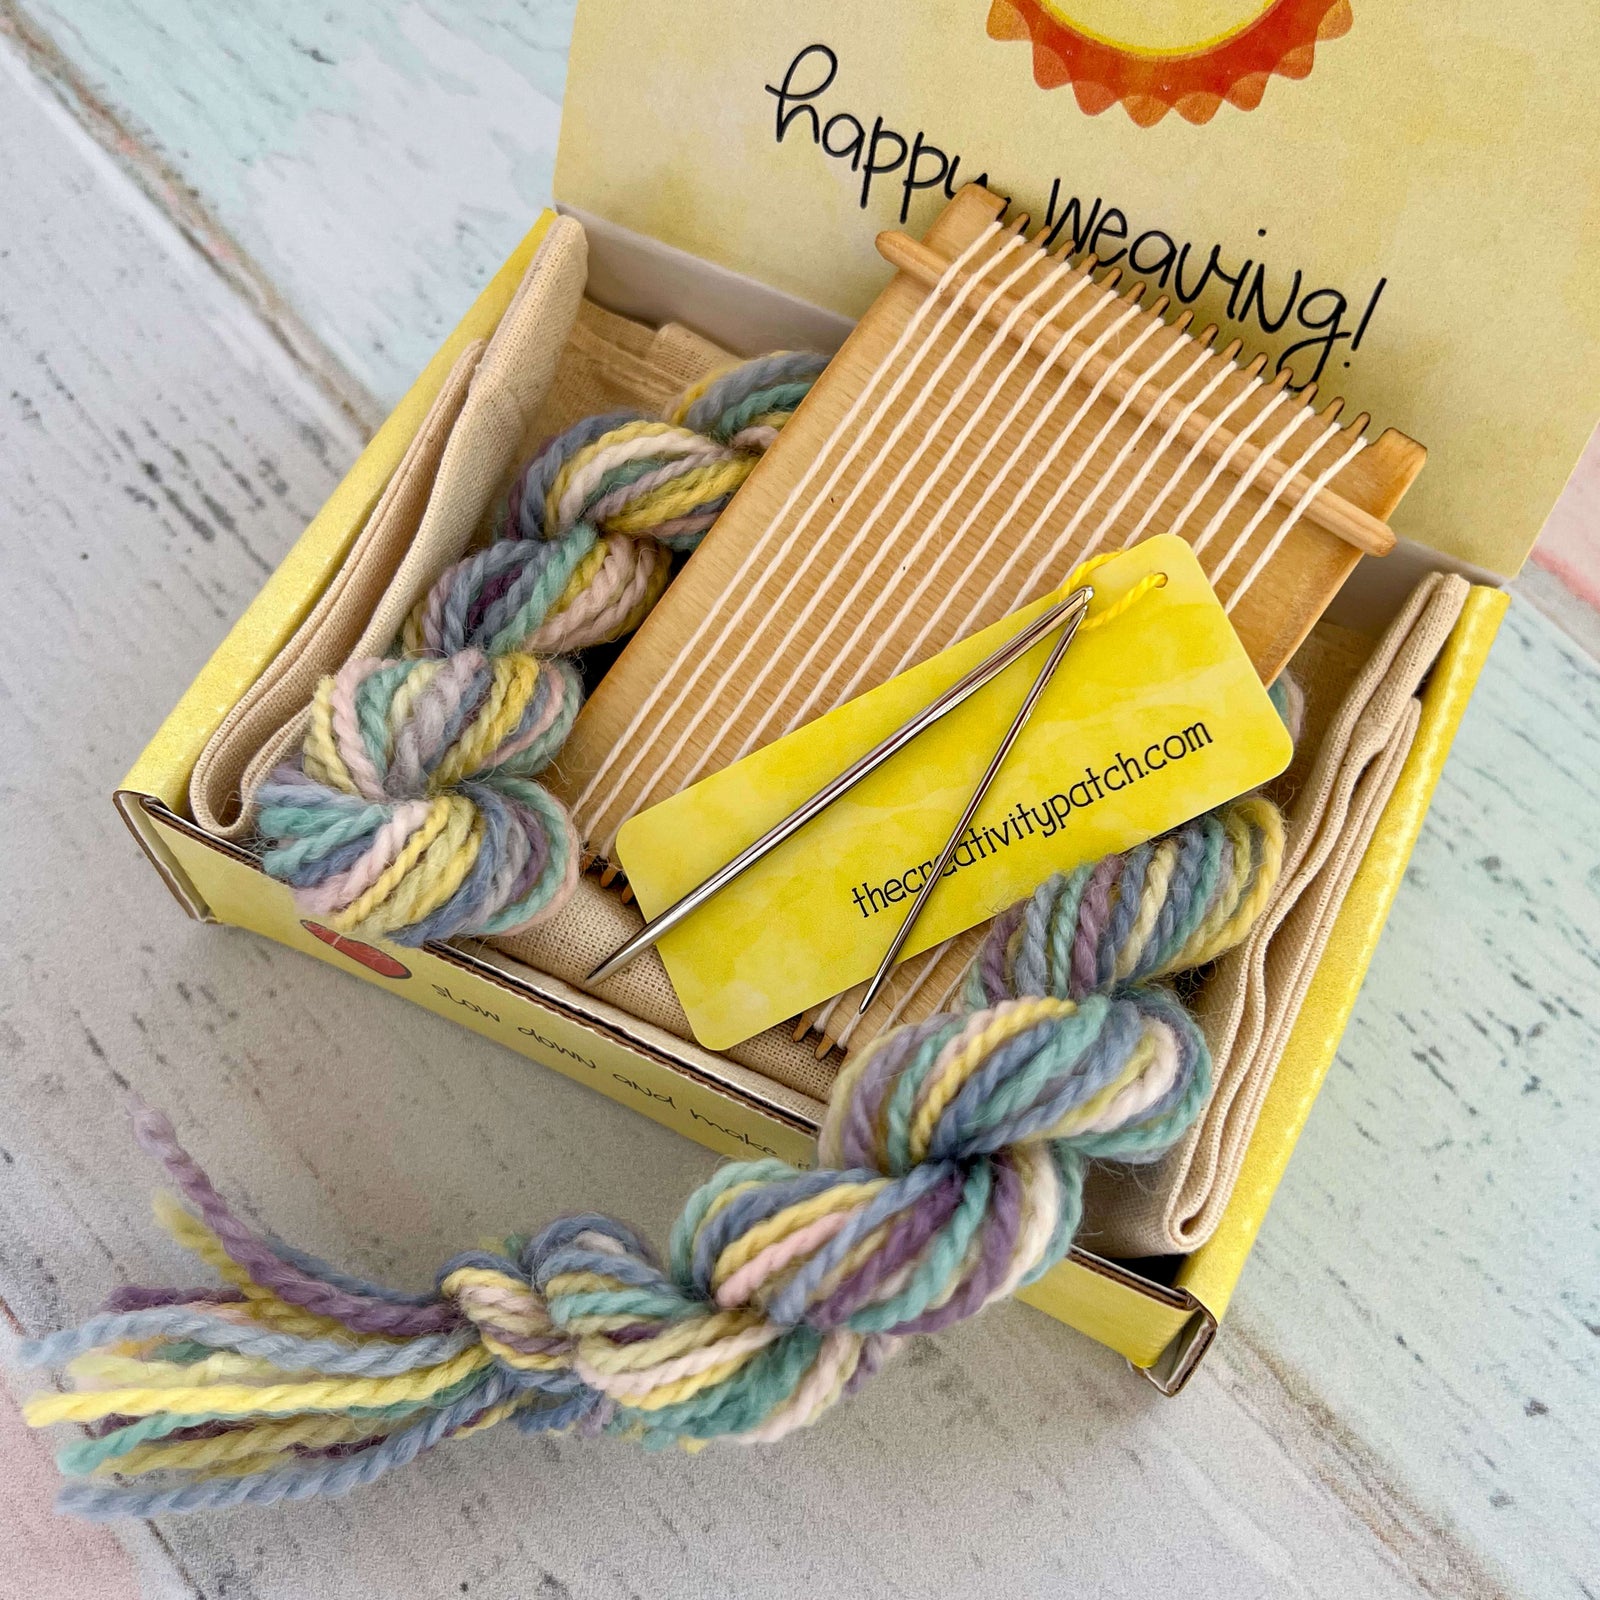 Wool Yarn Kit - Woodland Colors - The Creativity Patch - Lucy Jennings